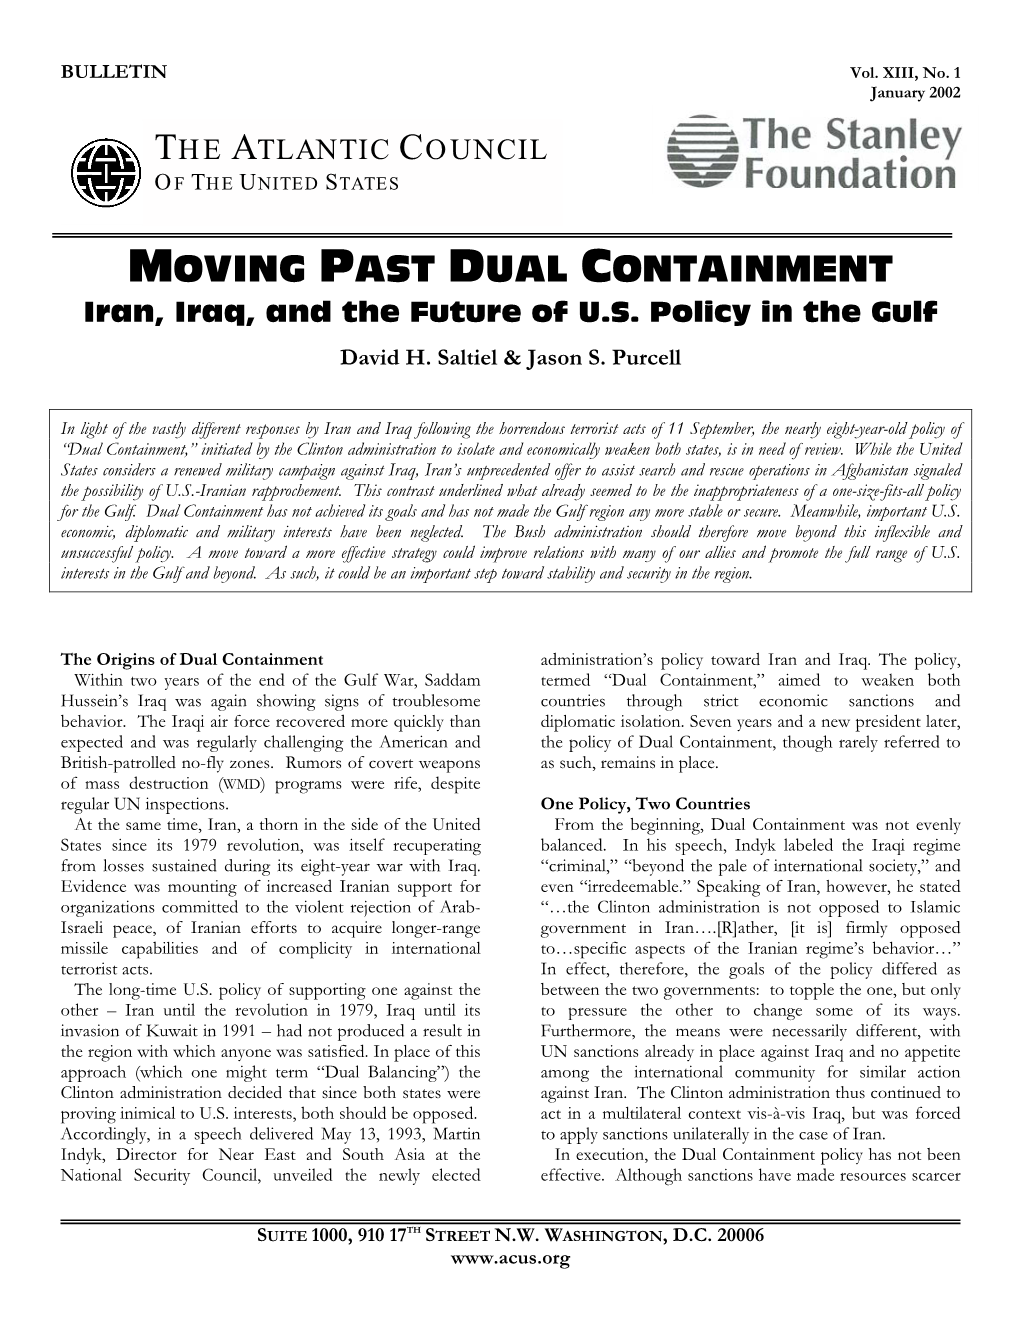 Moving Past Dual Containment: Iran, Iraq and the Future of US Policy in the Gulf